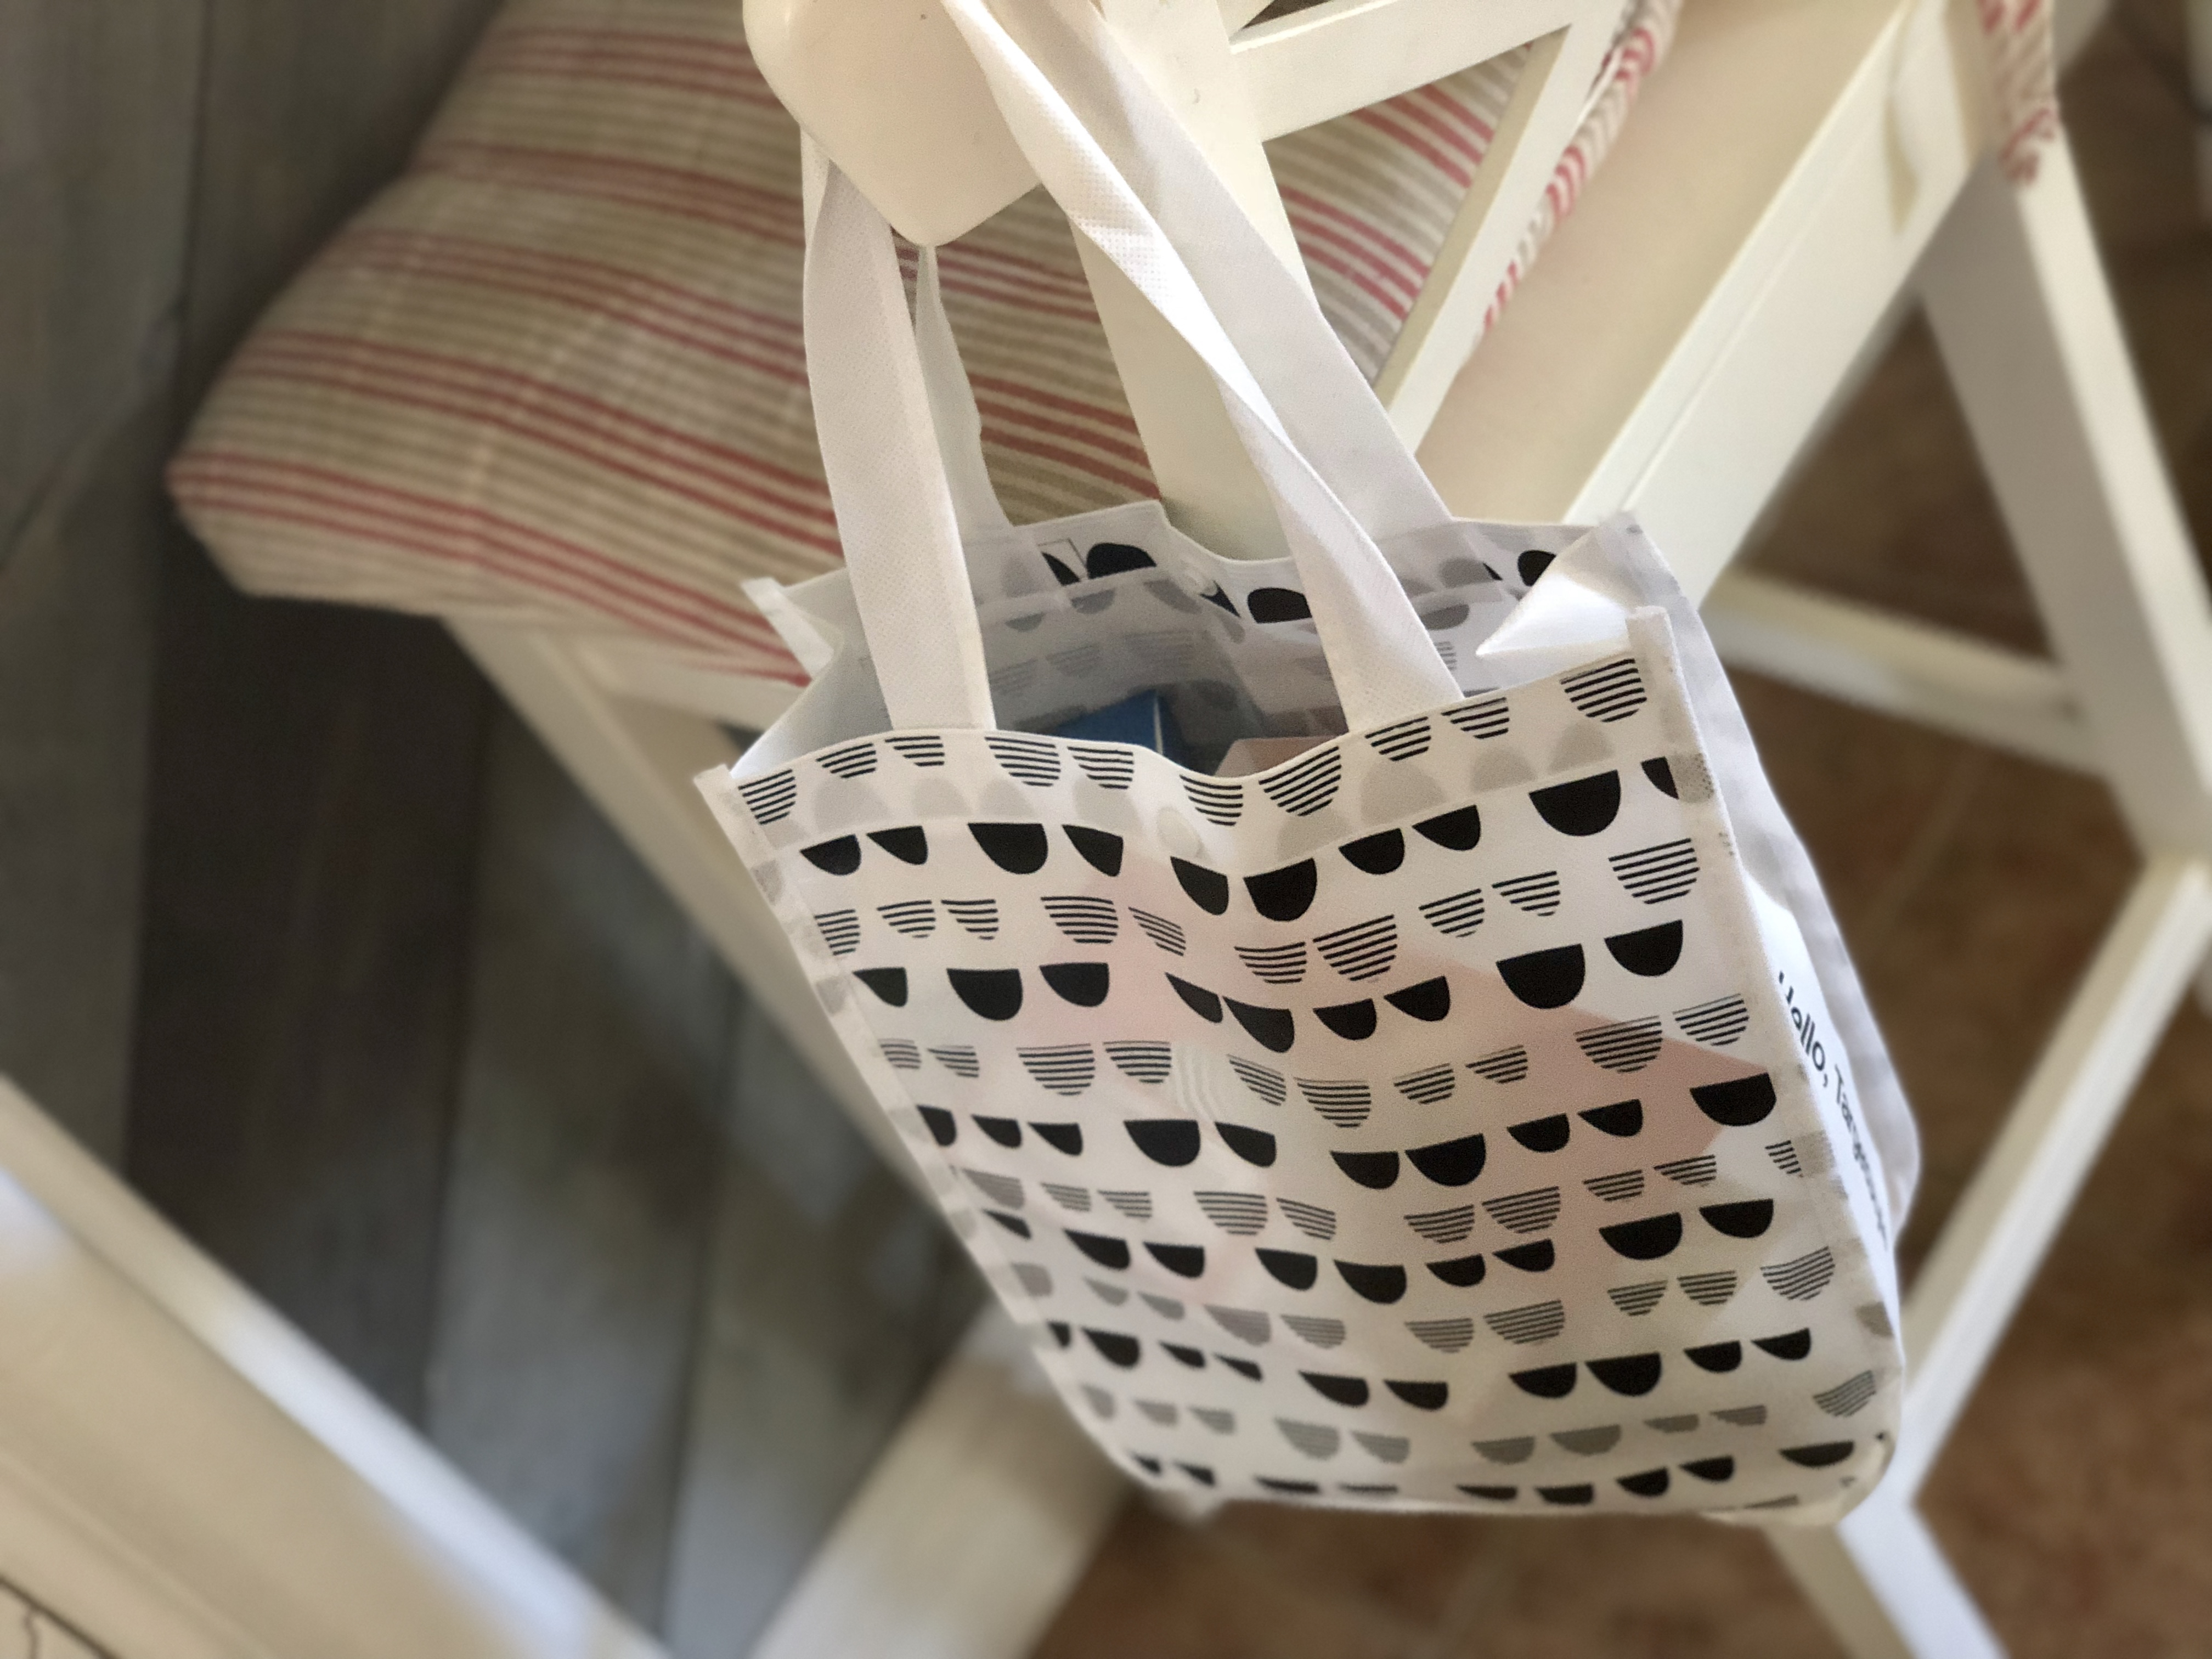 FREE Gift Bag with Target Baby Registry ($120 Value!) – Includes RARE  Coupons